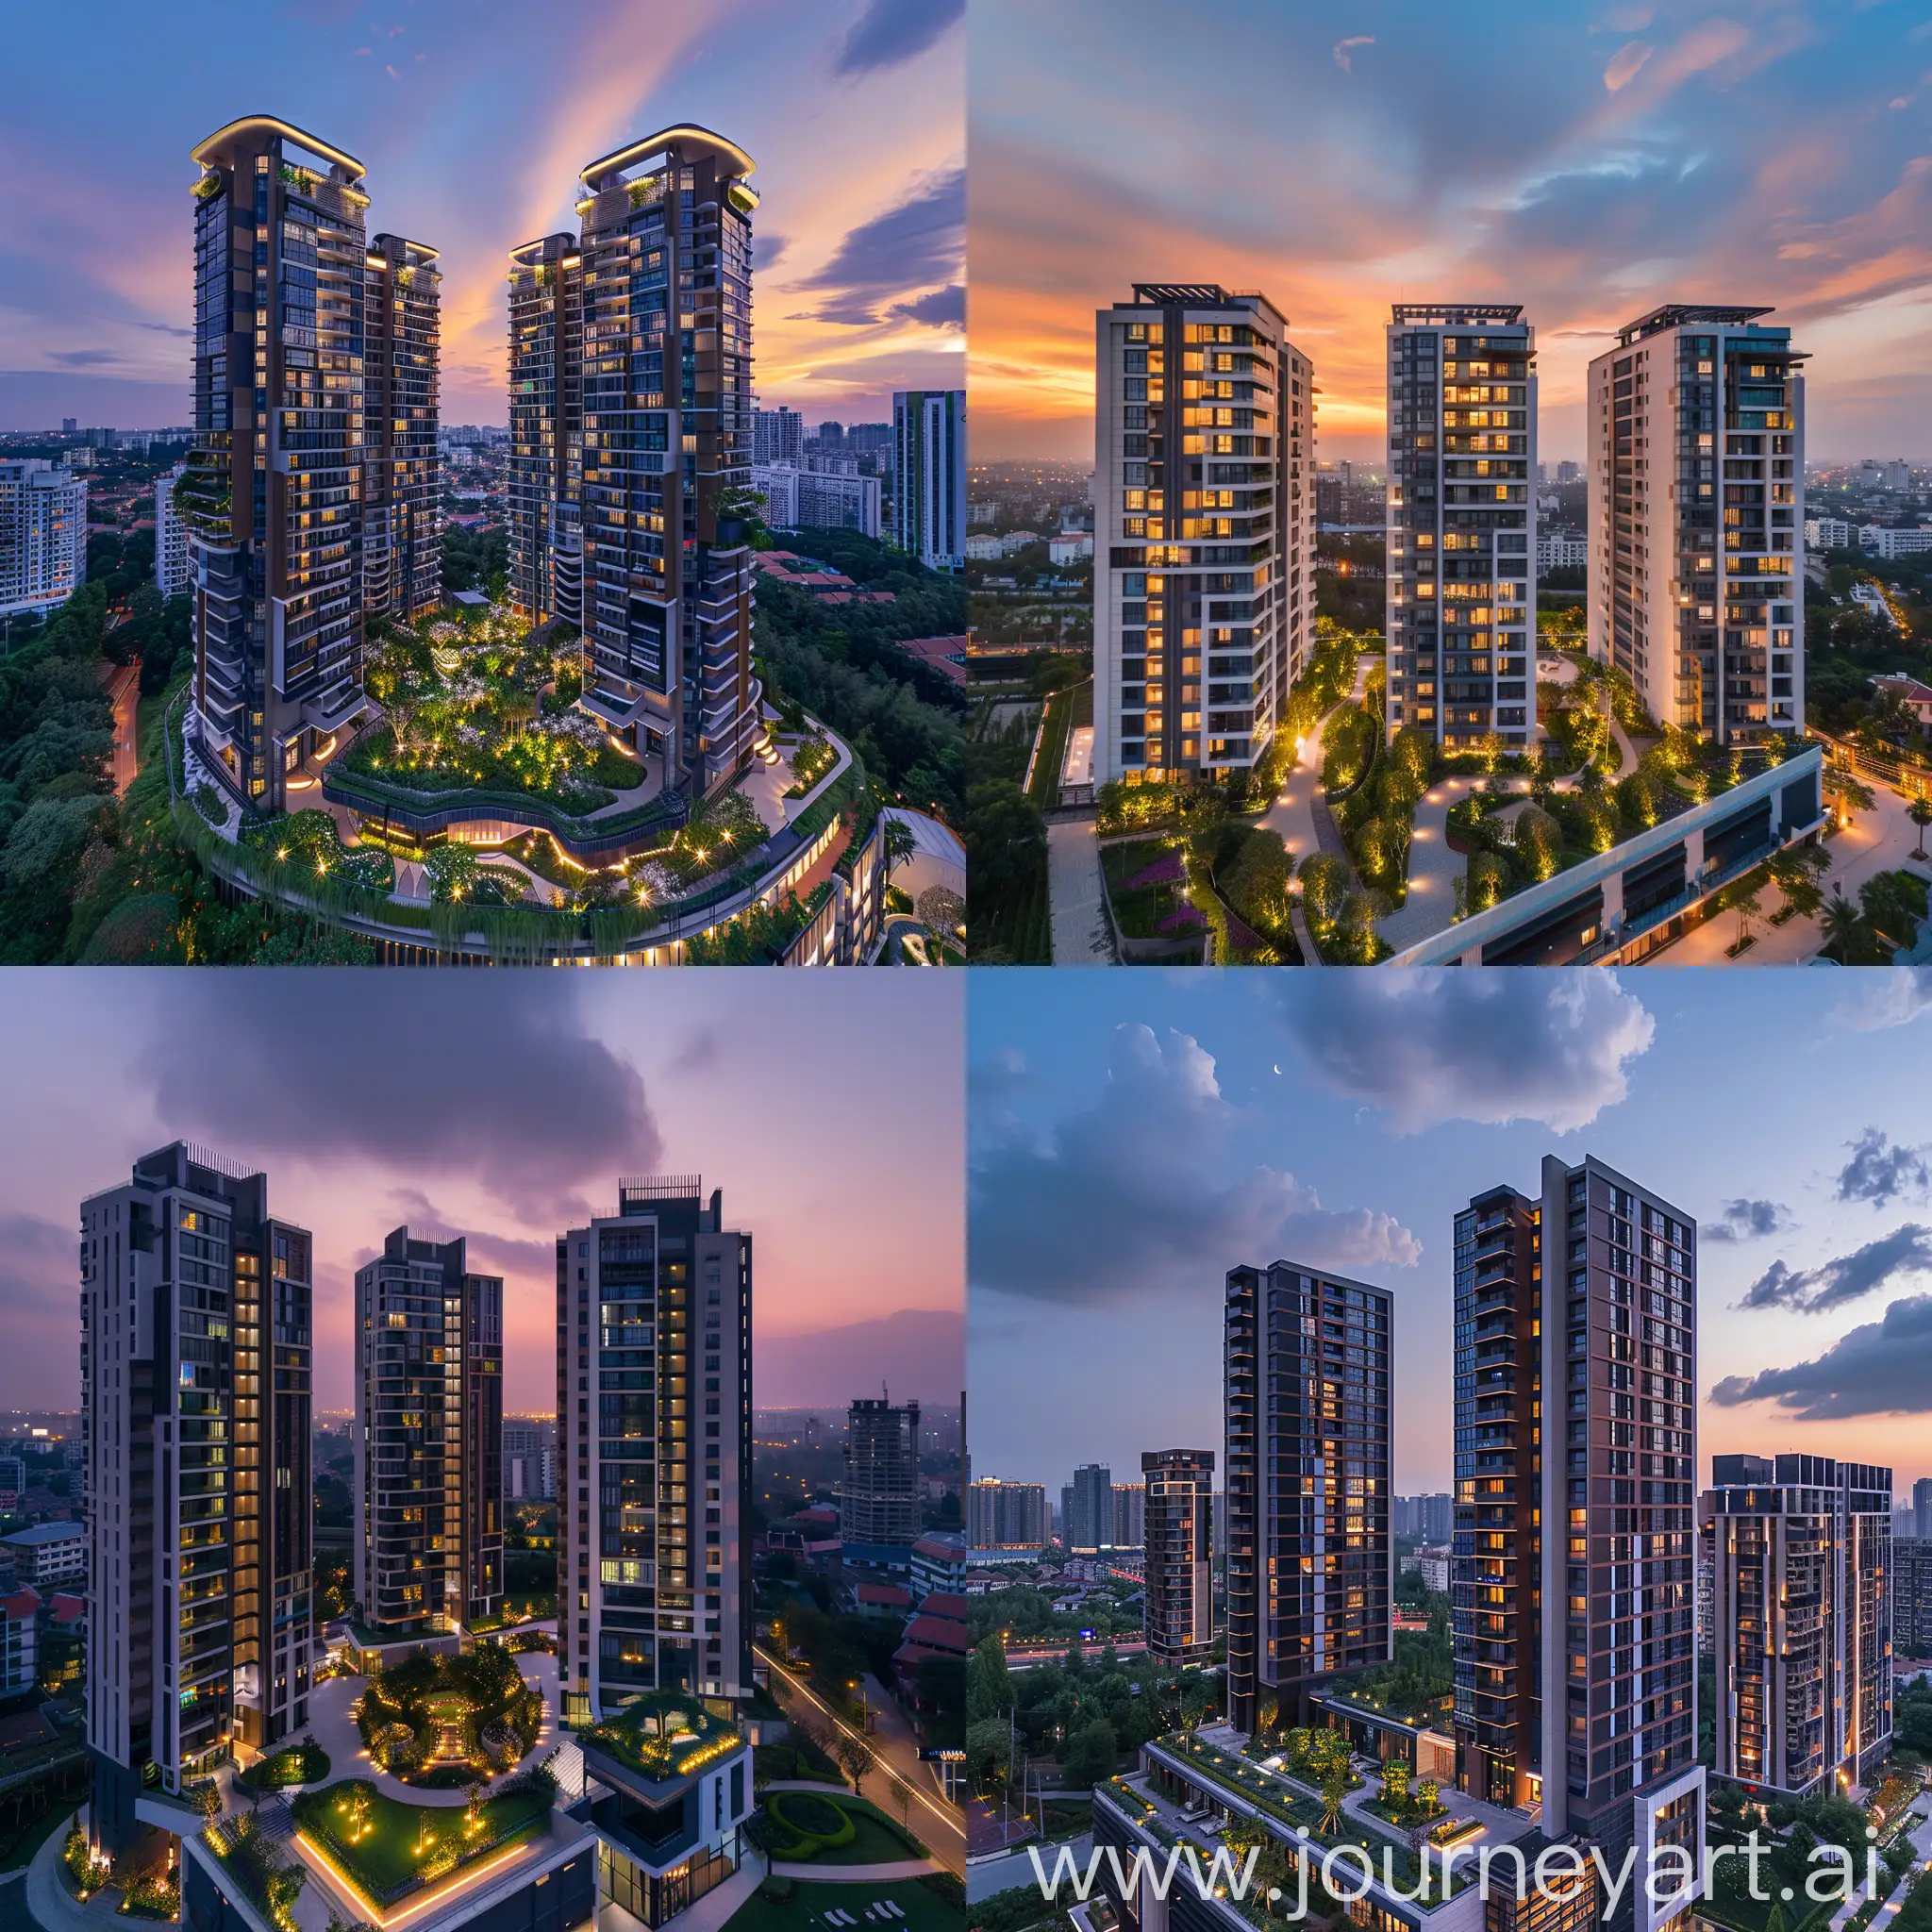 Elegant-Evening-Skyline-Modern-Apartment-Towers-and-Rooftop-Garden